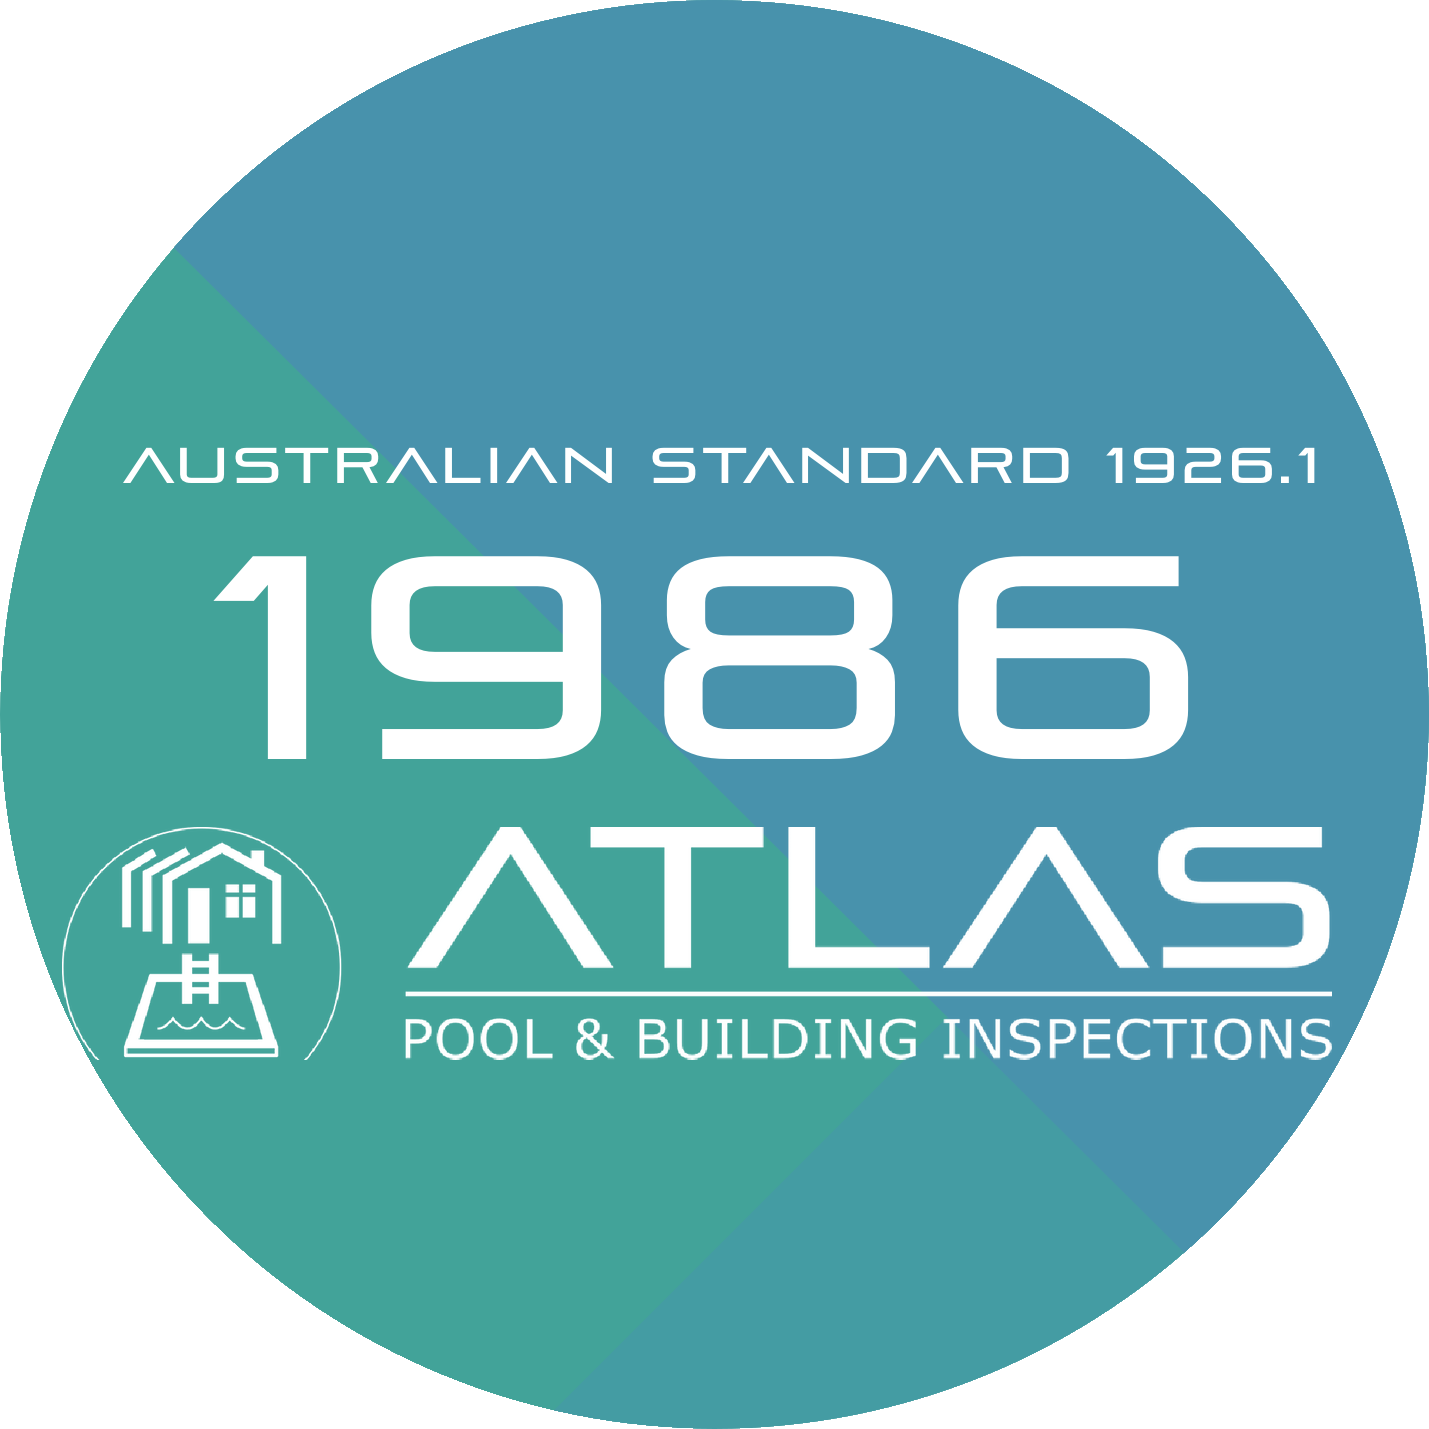 Pool Safety Report for AS 1926.1 - 1986